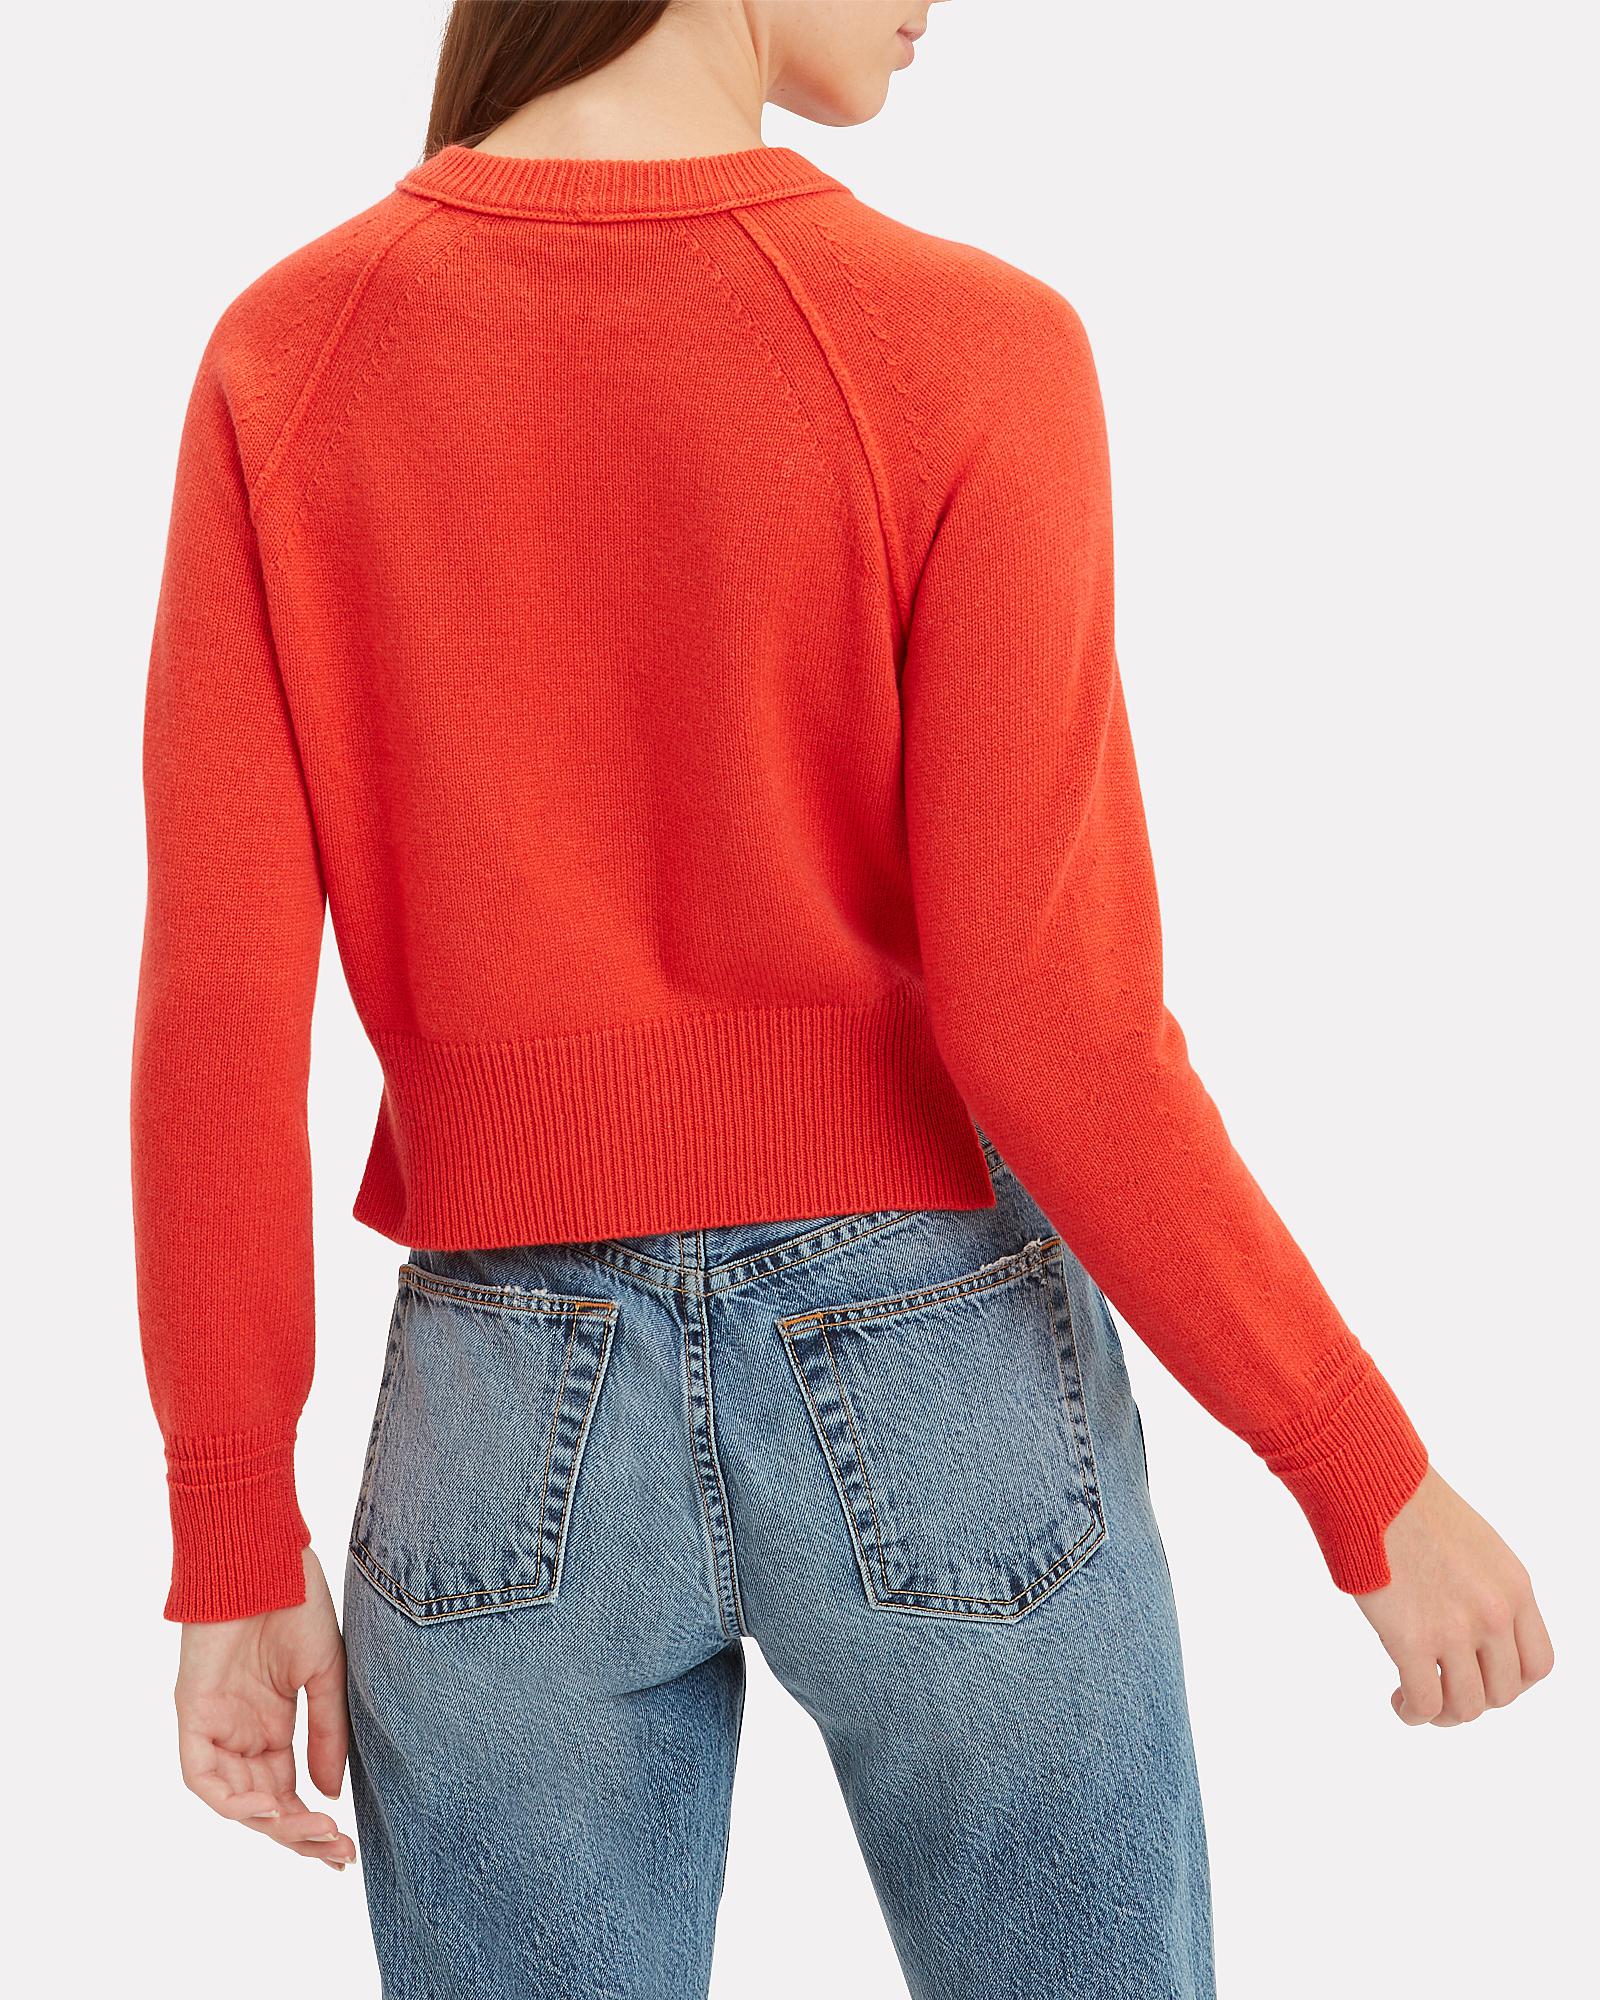 Helmut Lang Cropped Cashmere Sweater in Red - Lyst